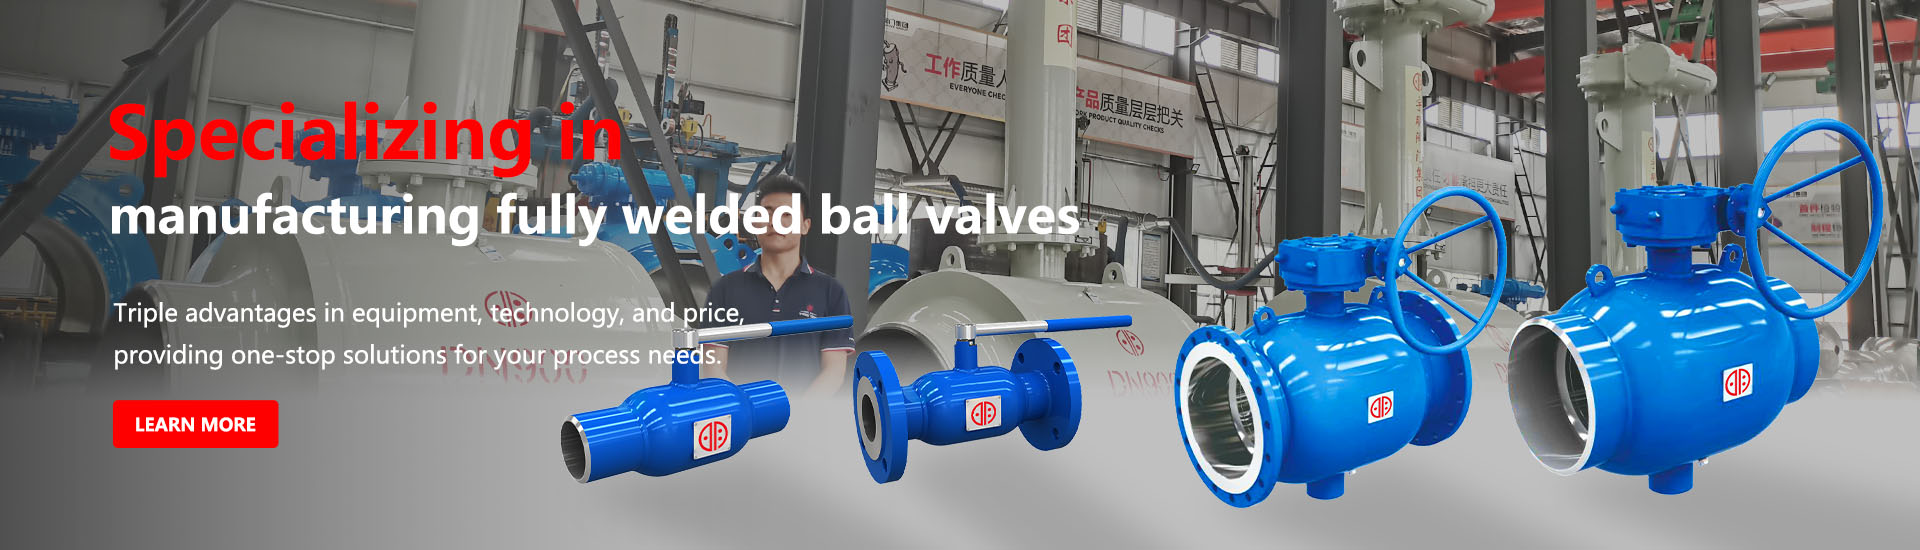 butterfly-valve-water